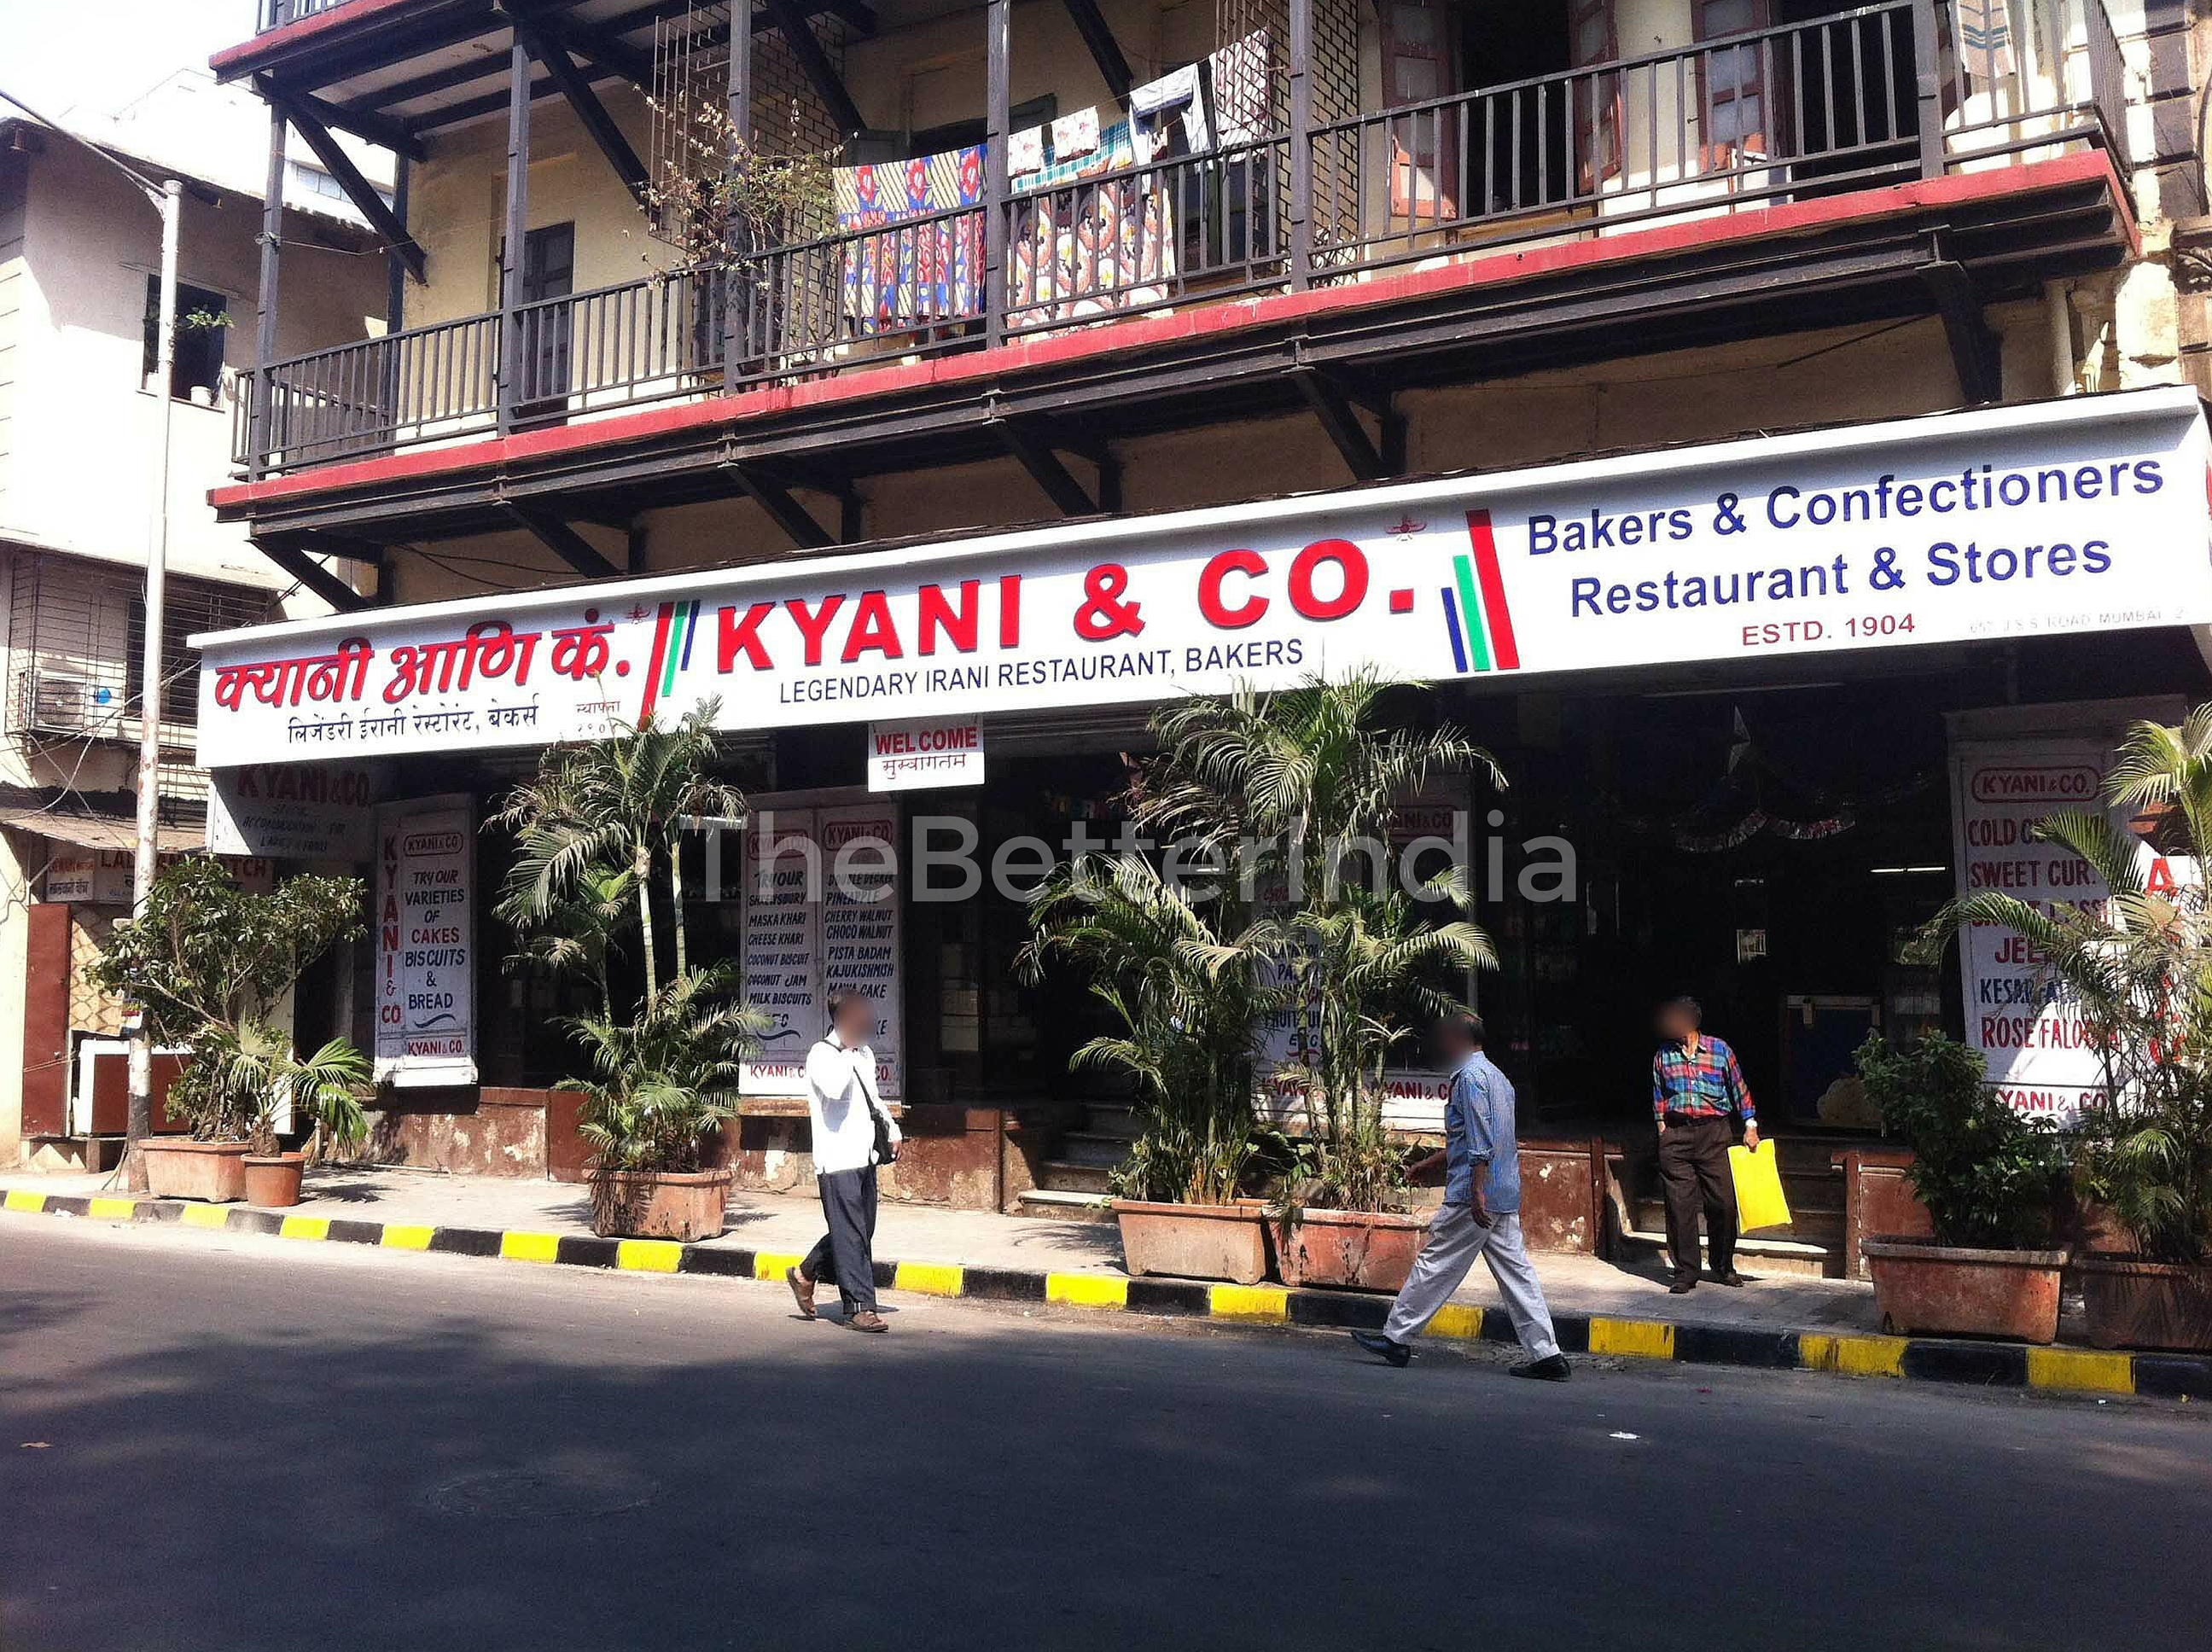 The iconic Kyani Bakery in Mumbai has been a favourite with café goers over the decades.